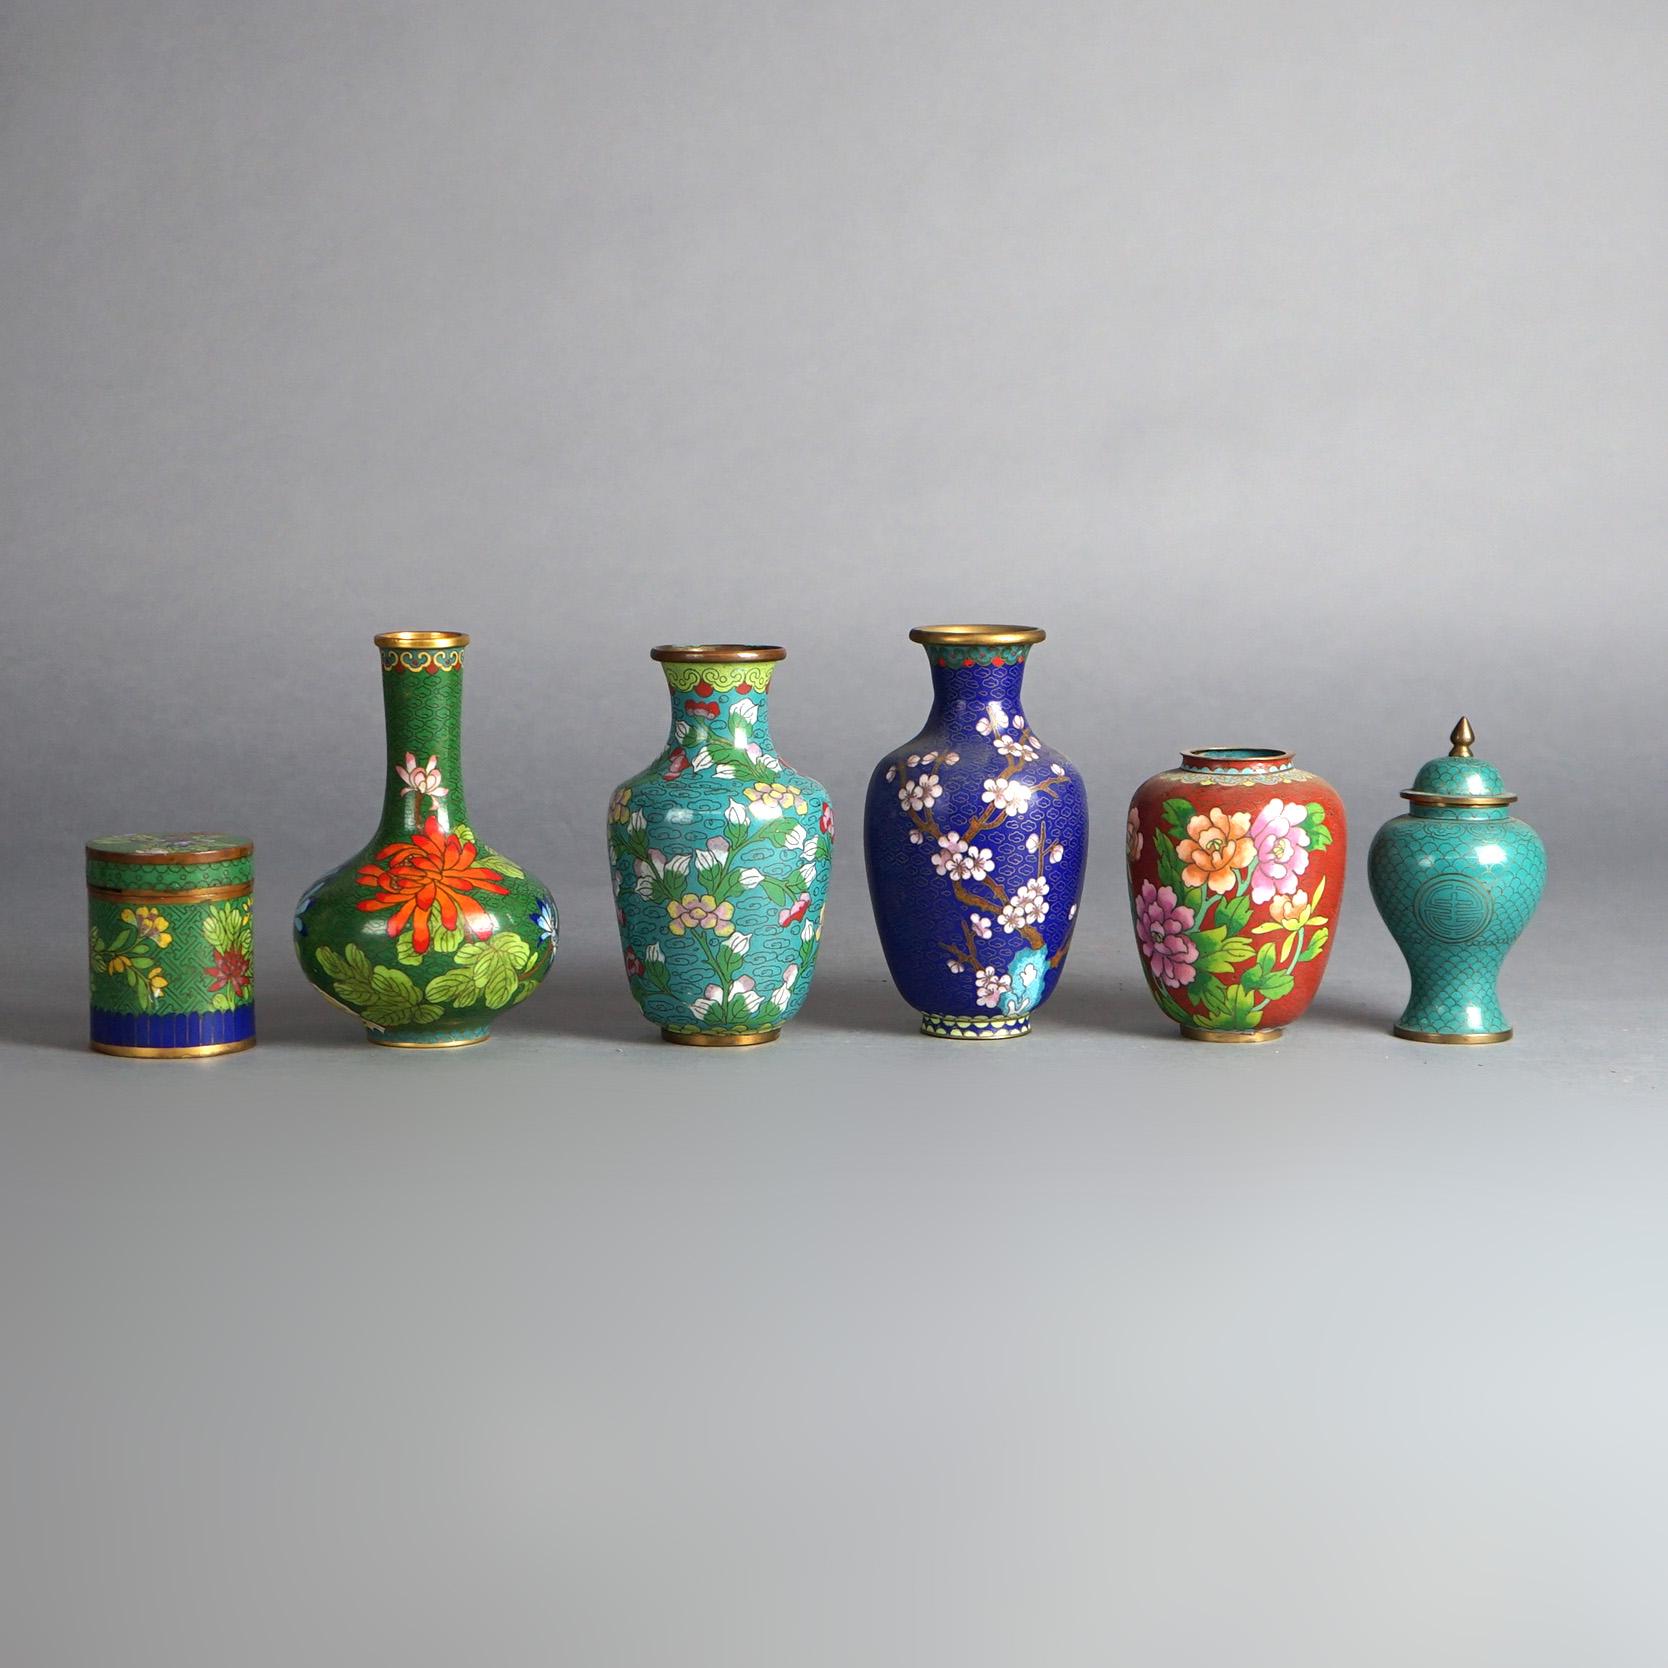 Six Miniature Antique Japanese Meiji Cloisonne Enameled Items including Flower Vases, Urns and Covered Jar C1920

Measures- Green Jar: 3''H x 2.5''W x 2.5''D; Green Turquoise: 4.75''H x 2.75''W x 2.75''D; Red/Brown With Flowers: 3.25''H x 3.5''W x